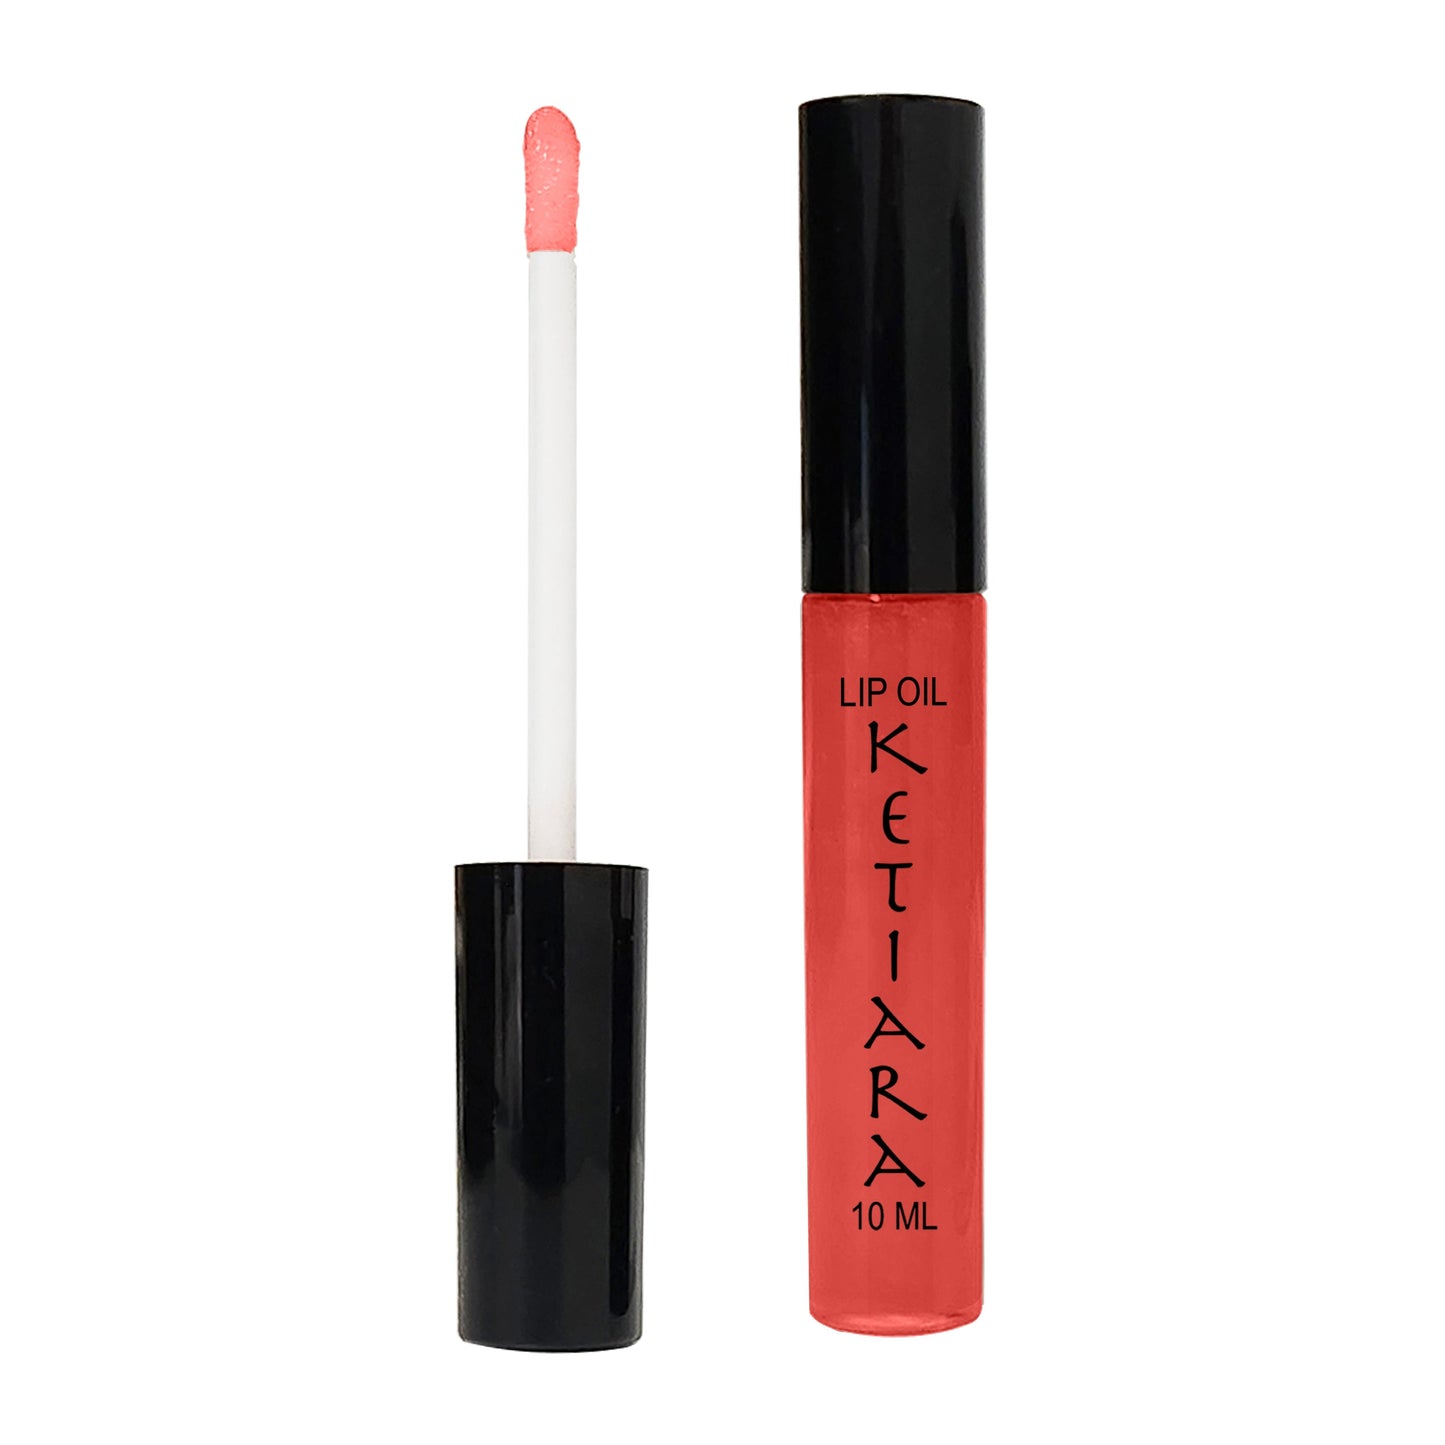 Bittersweet Hydrating And Conditioning Non-sticky Premium Sheer Lip Oil Infused With Hyaluronic Acid